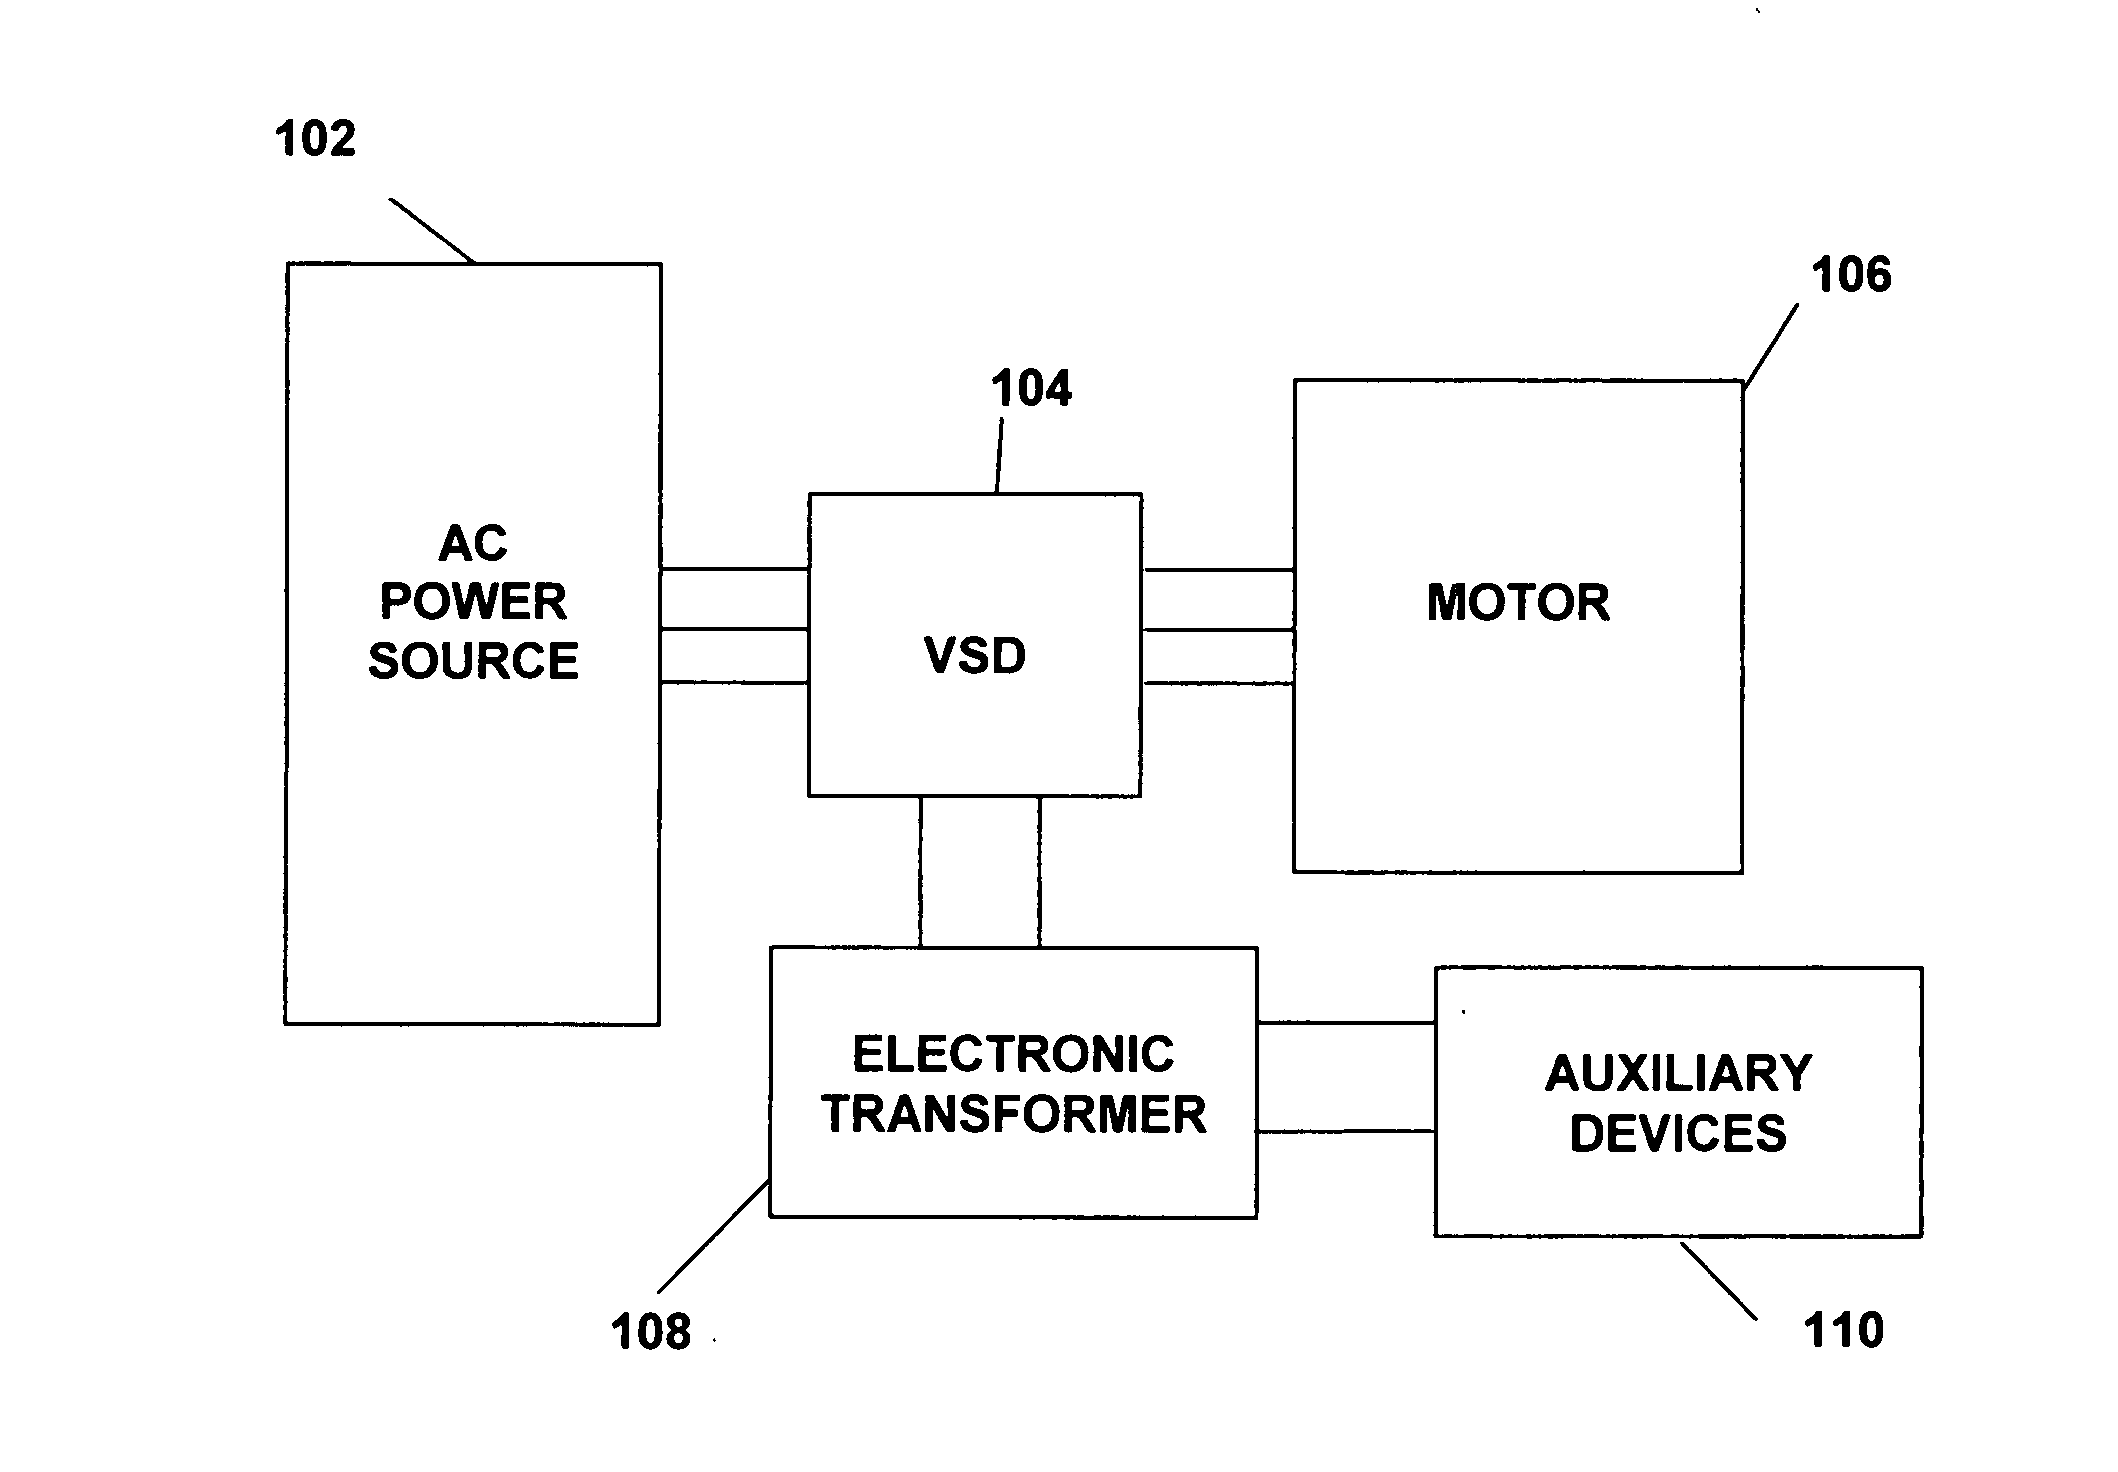 Electronic control transformer using DC link voltage